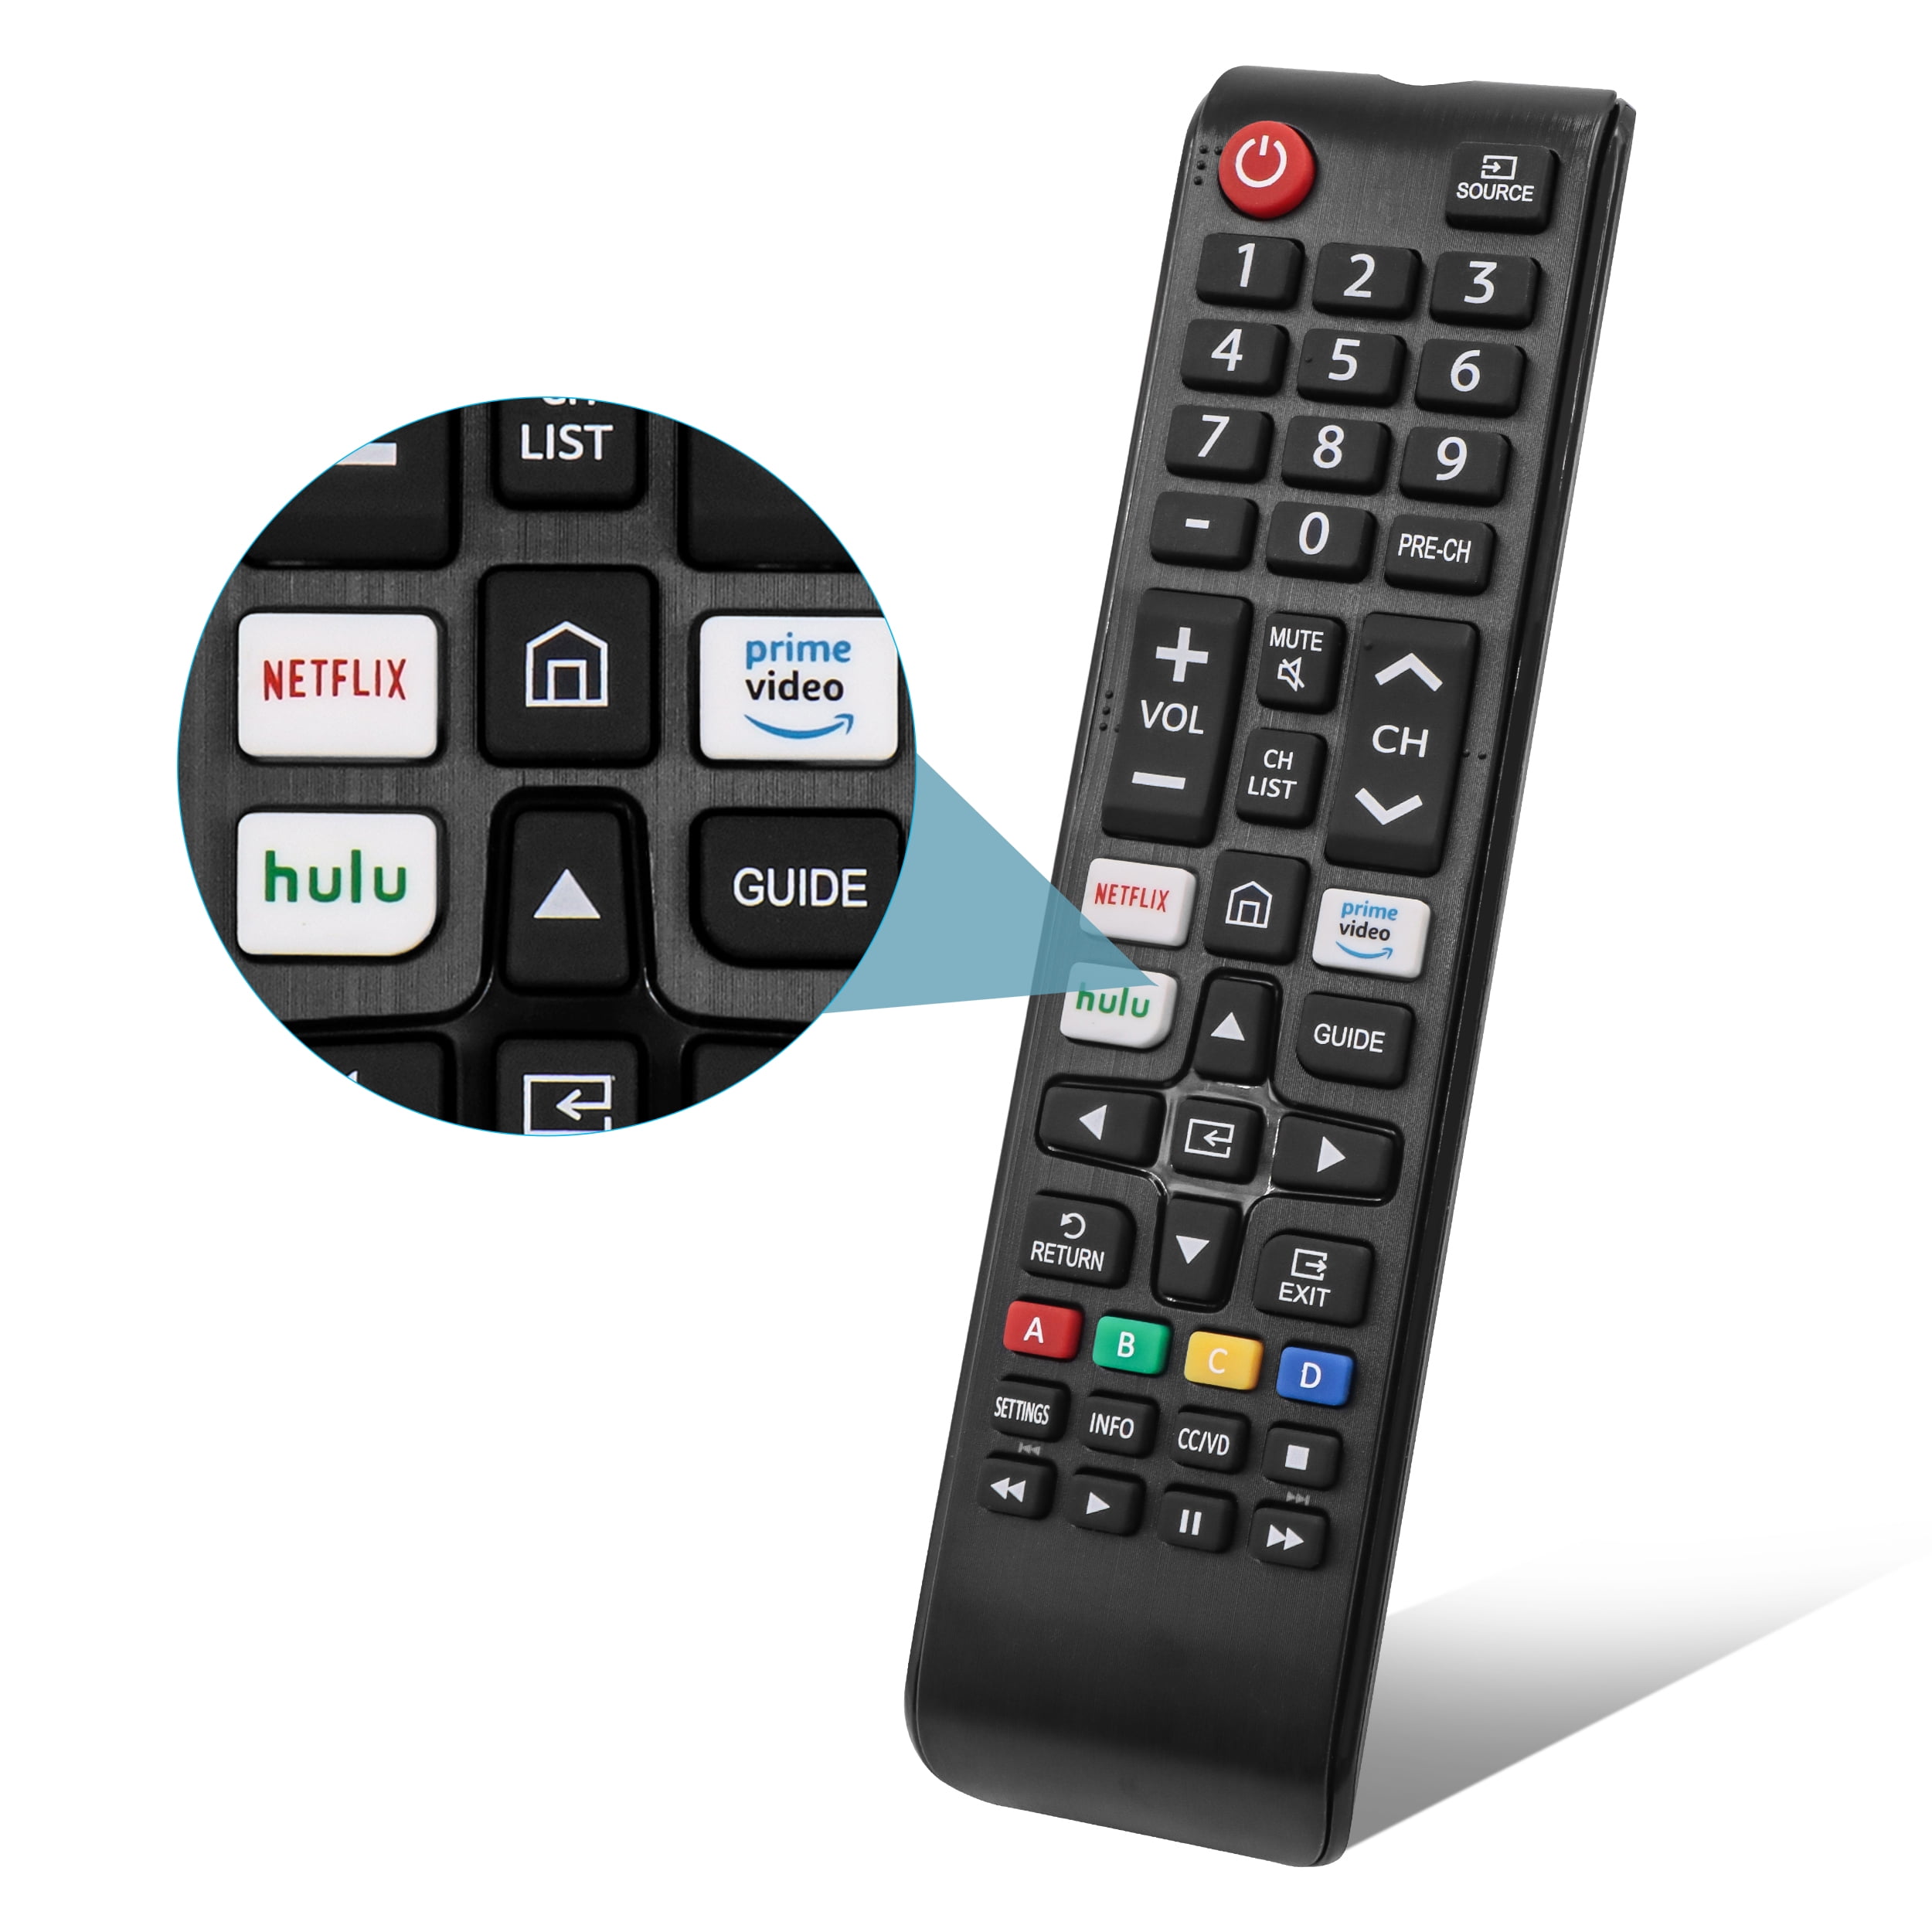  Newest Universal Remote Control for All Samsung TV